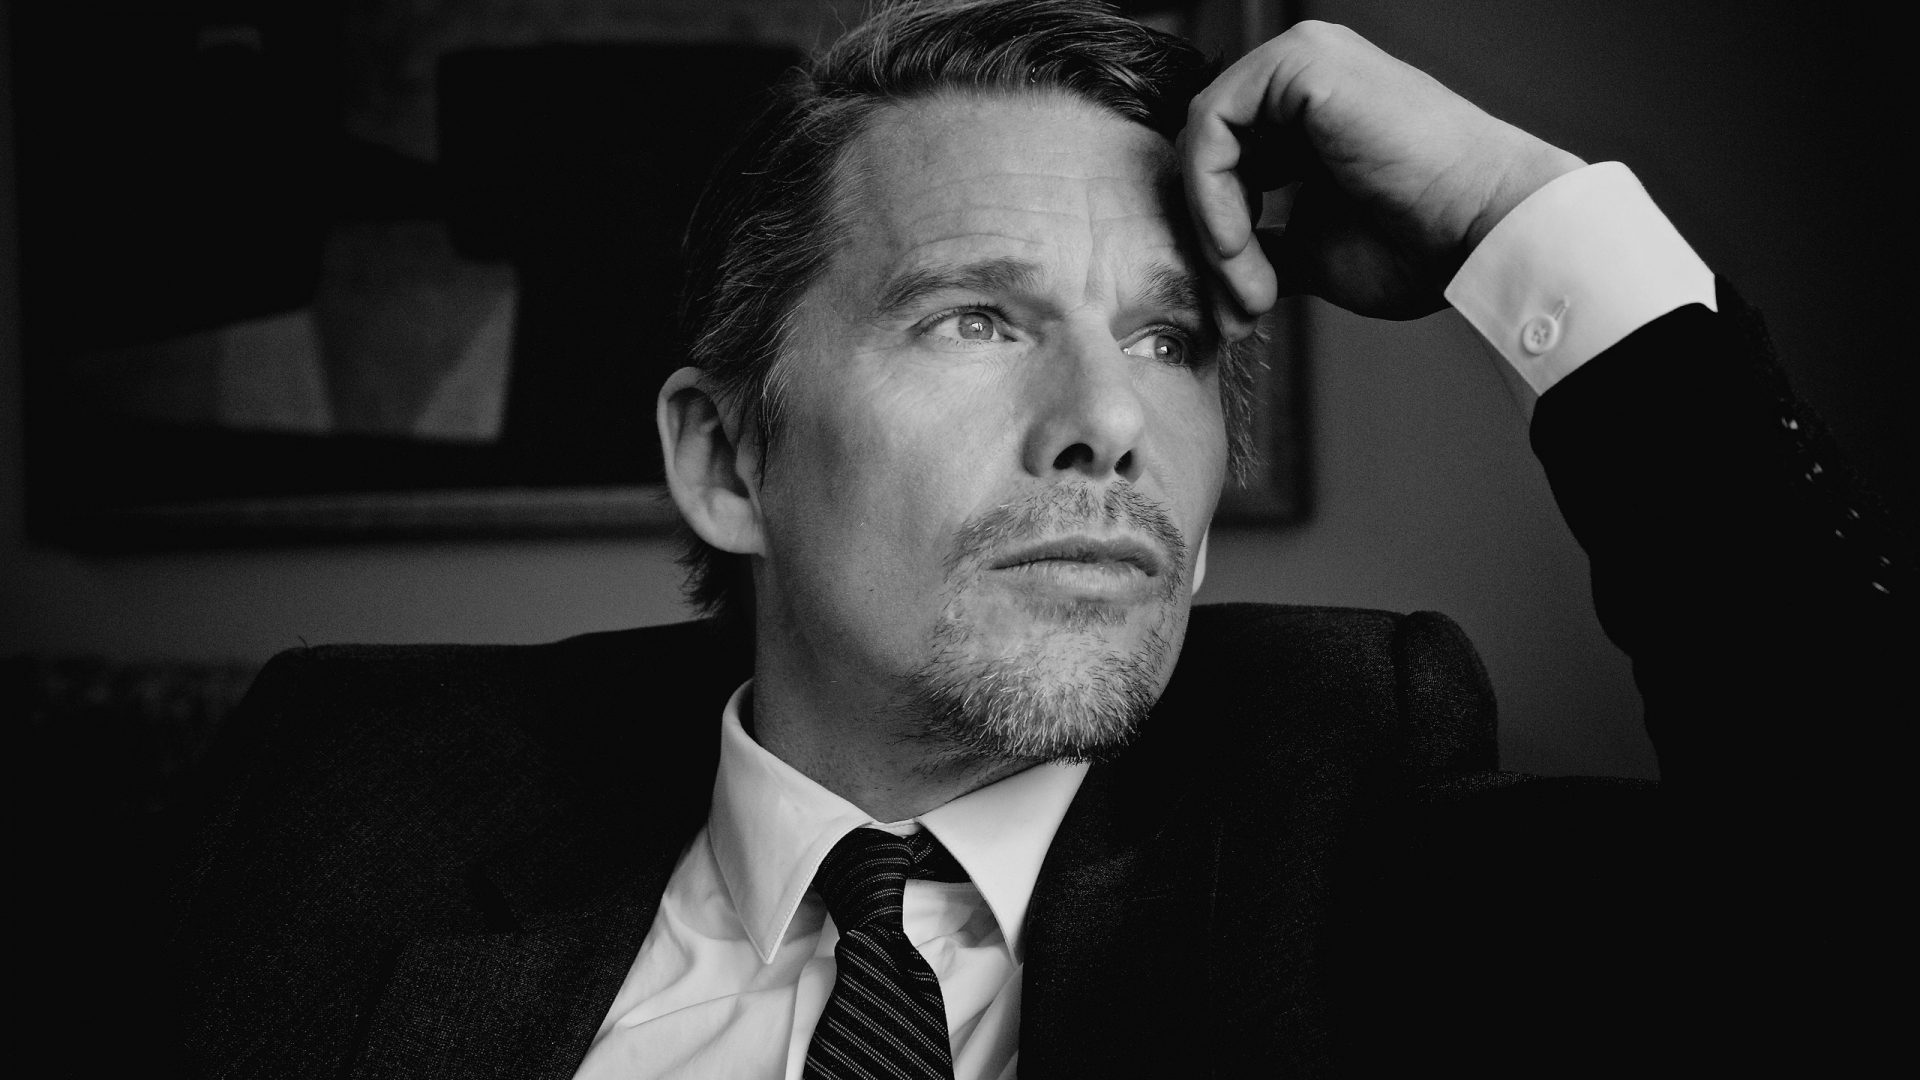 Ethan Hawke for 1920 x 1080 HDTV 1080p resolution